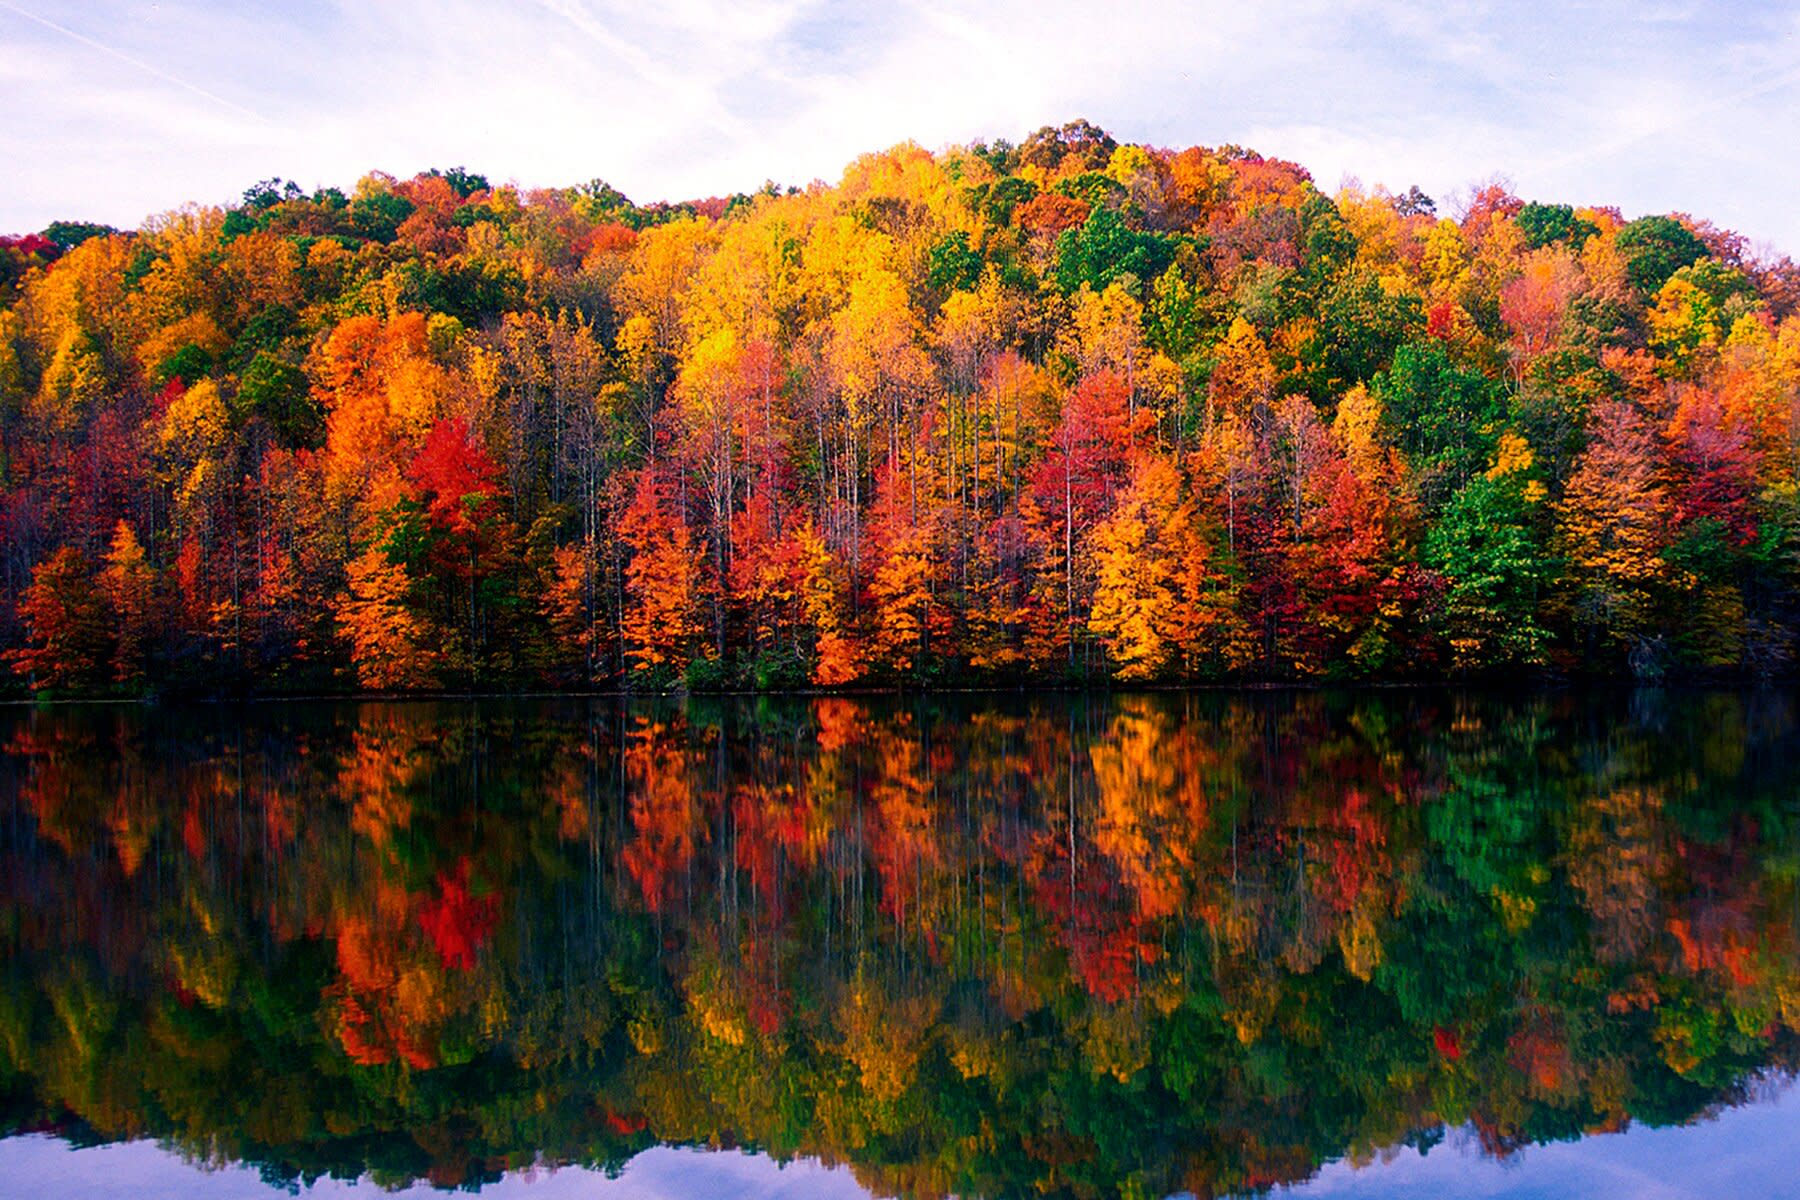 West Virginia Has Amazing Fall Foliage — Here Are the Best Places to See It